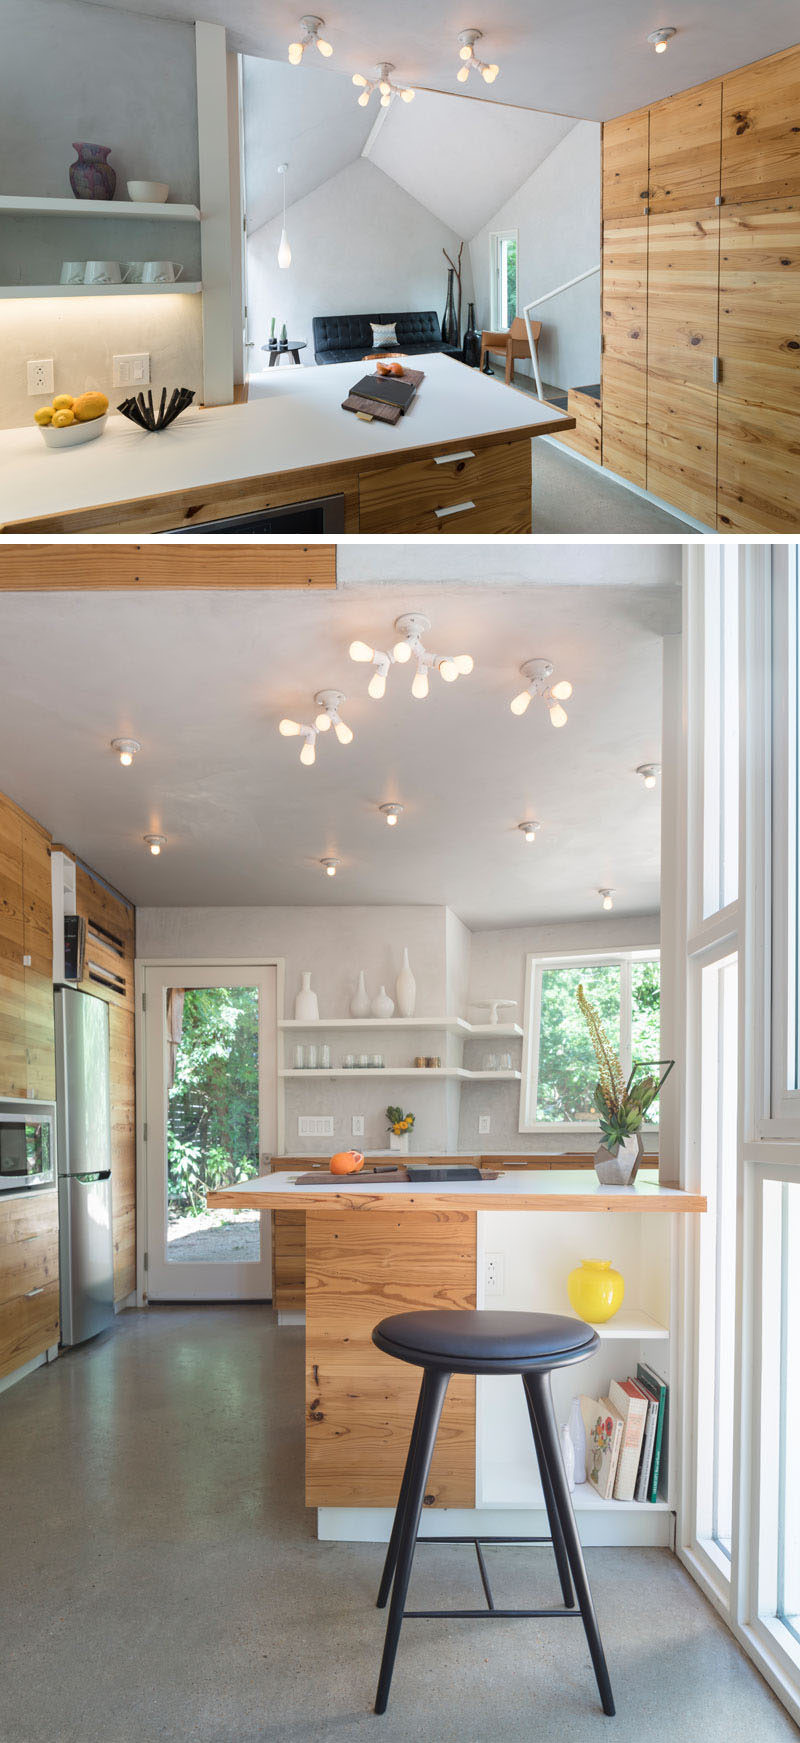 Colquitt inspired light fixtures, hidden lighting, and reclaimed longleaf pine cabinetry are all design elements that have been included in this modern kitchen design. #ModernKitchen #Lighting #WoodCabinets